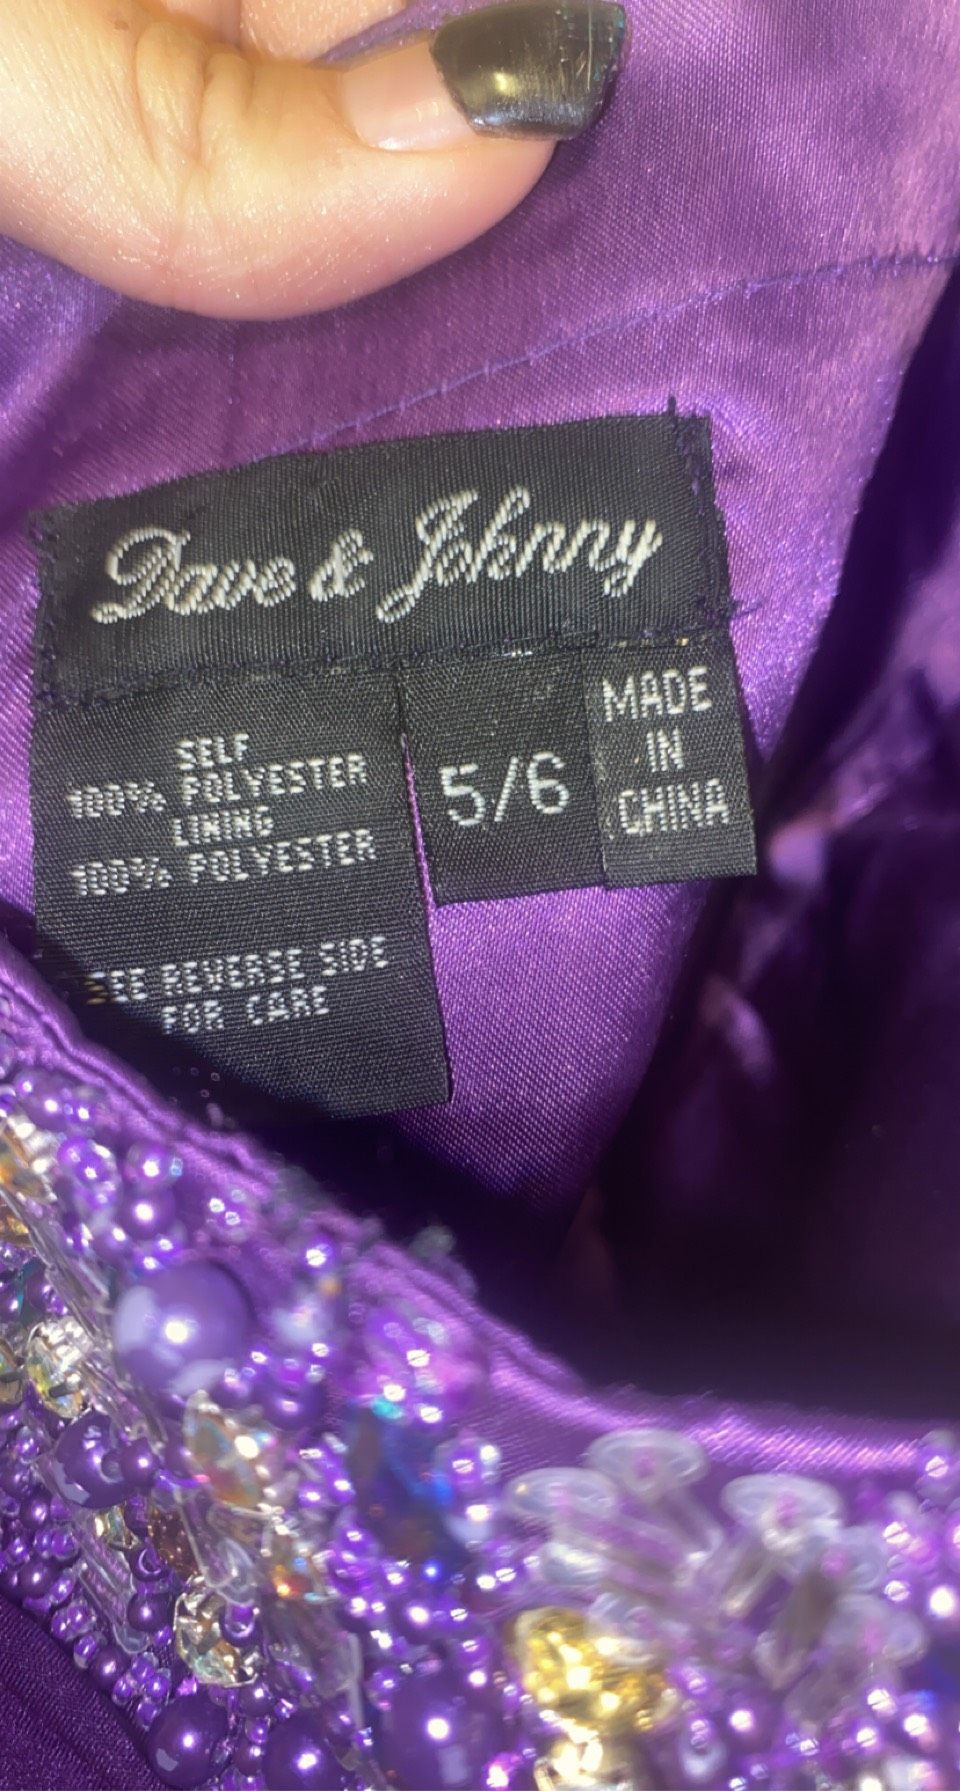 Dave and Johnny Size 4 Purple A-line Dress on Queenly